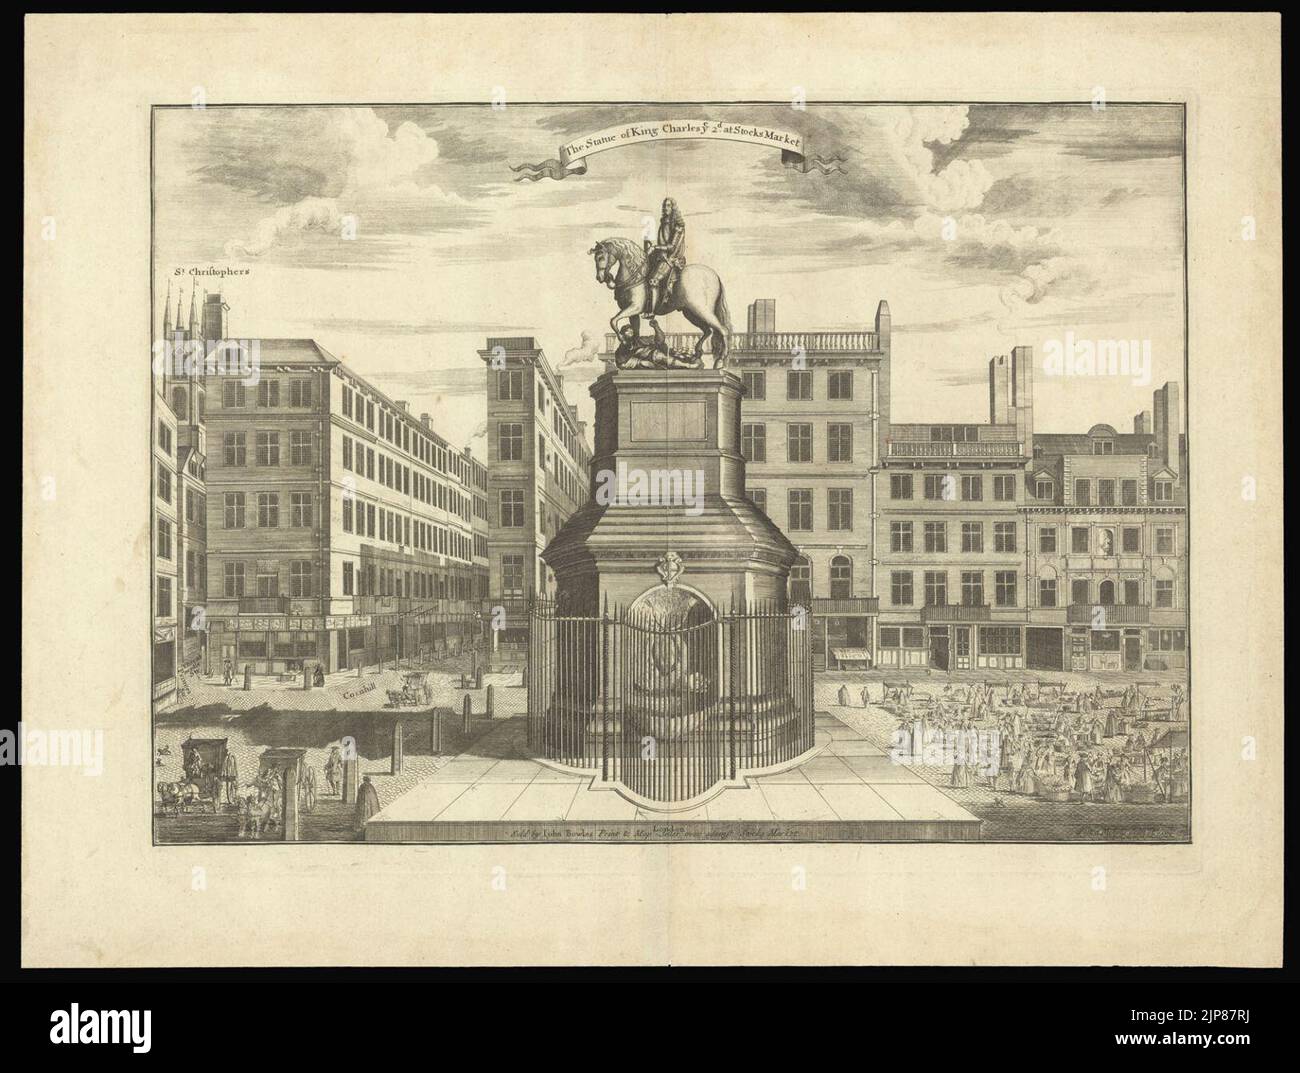 The Statue of King Charles ye 2nd at Stocks Market - Sutton Nicholls, 1720 Stock Photo